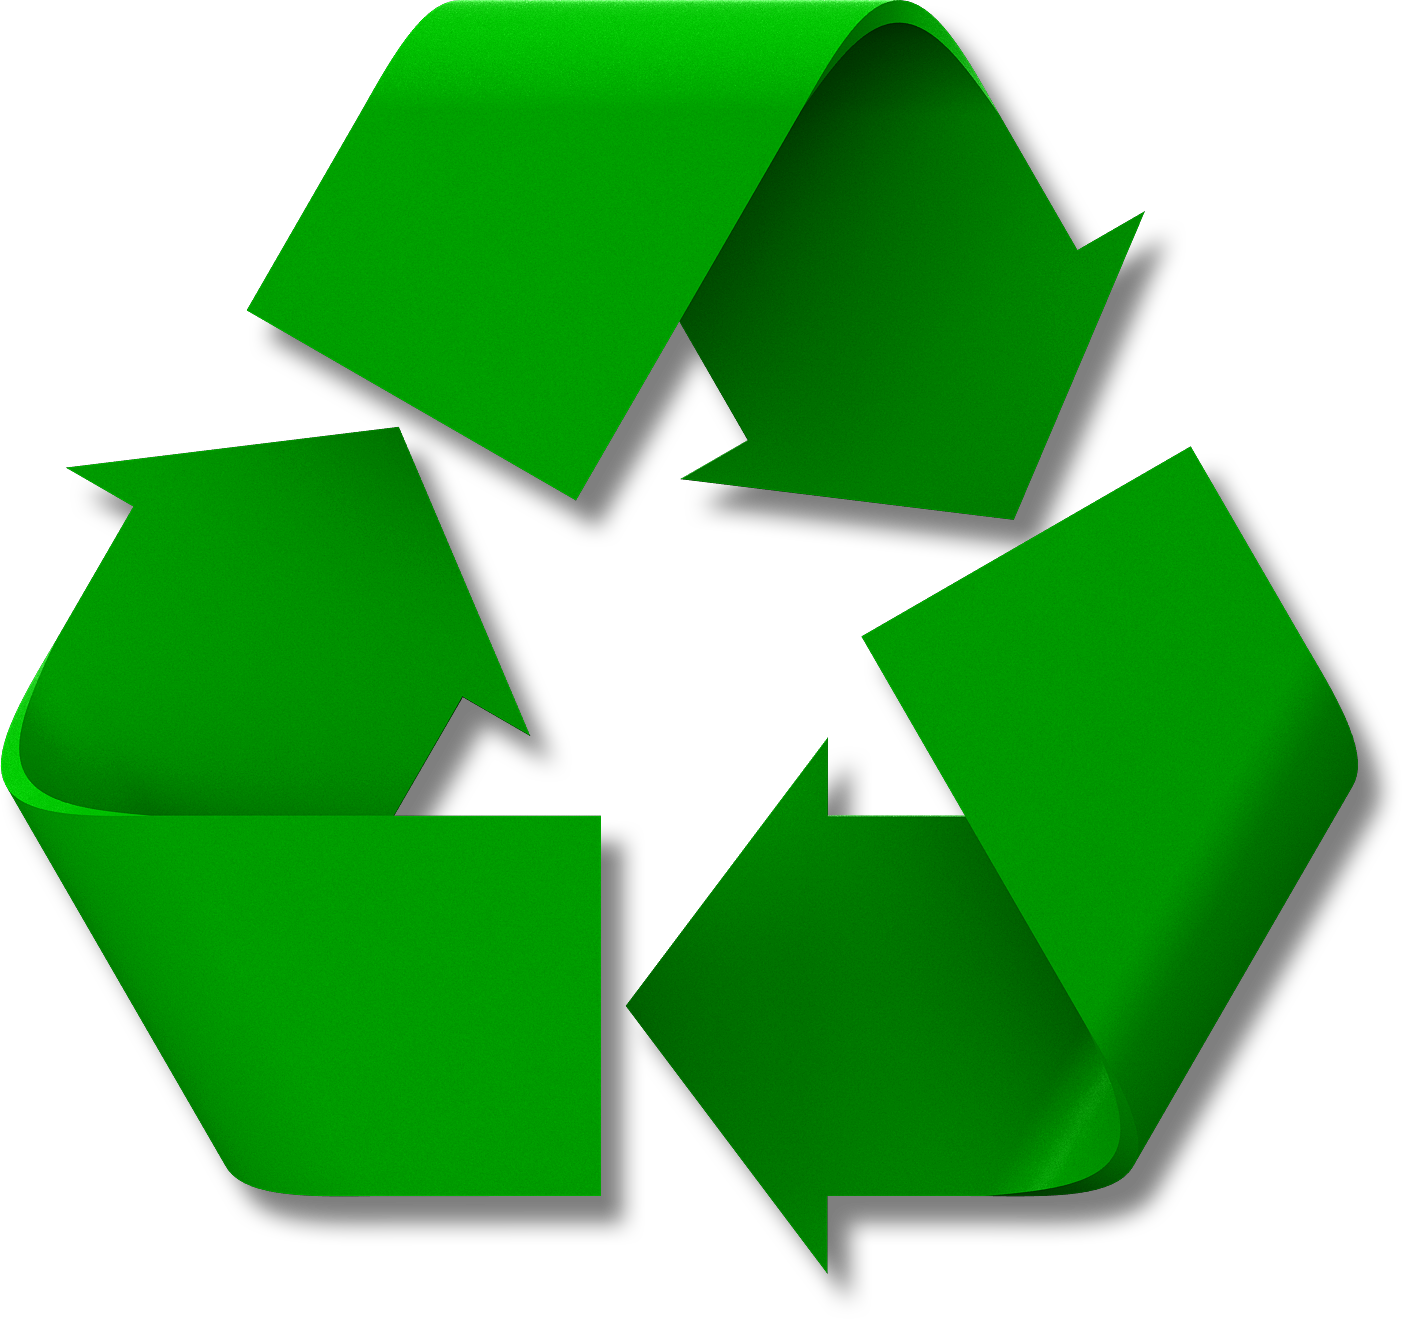 Mount Pleasant, TX - Official Website - Recycle Center